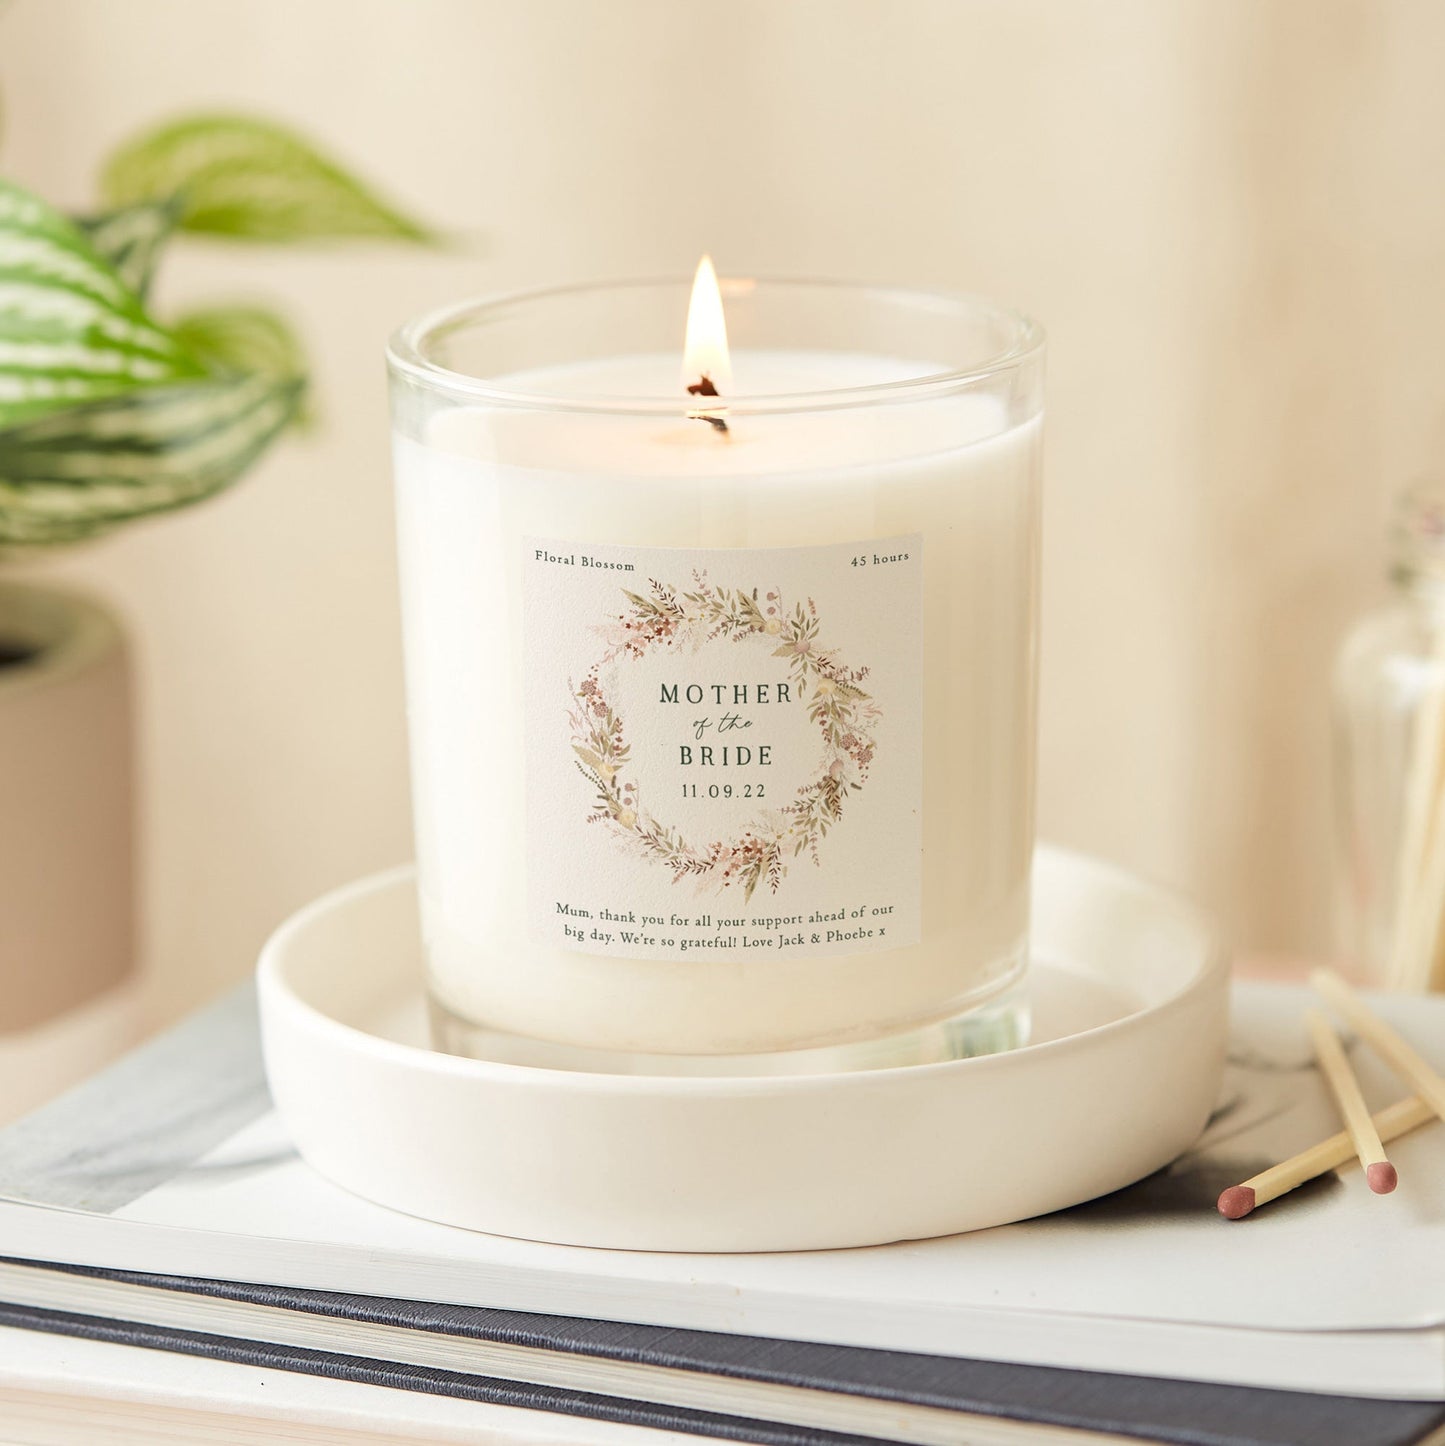 Mother of the Bride Personalised Luxury Candle Dried Flower - Kindred Fires